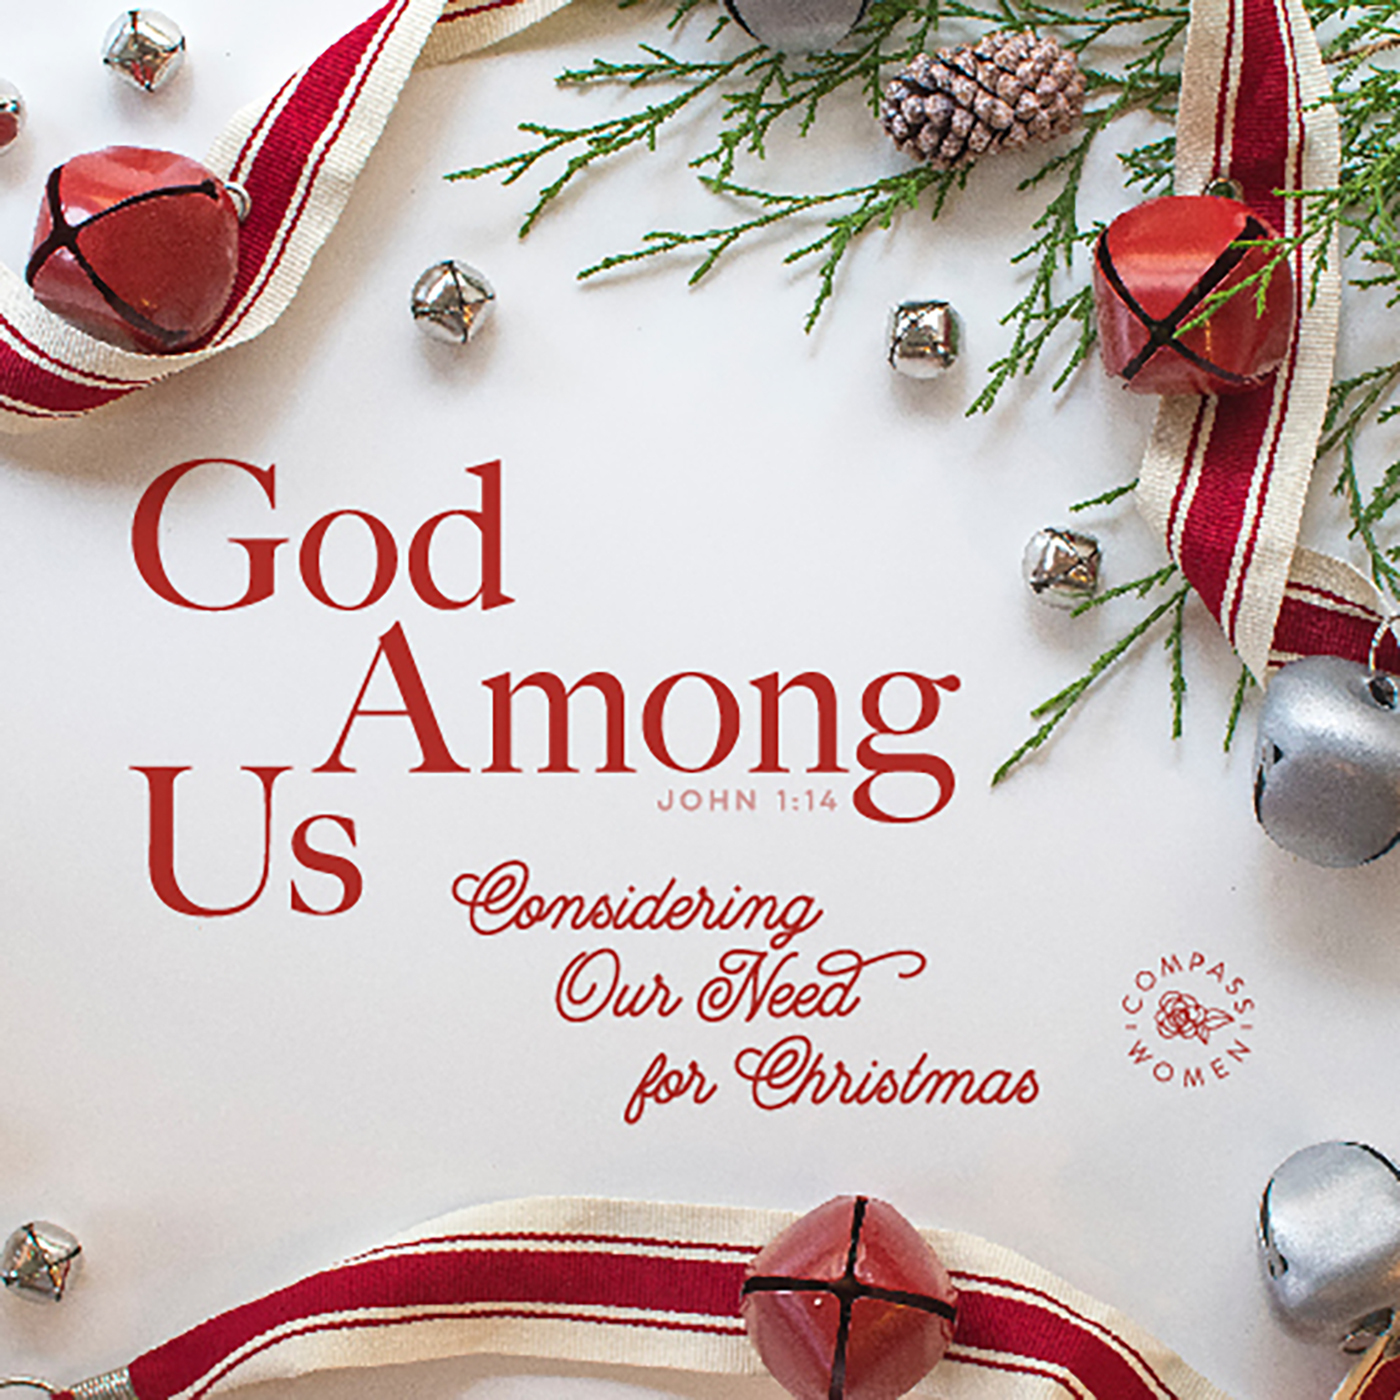 Artwork for God Among Us: Considering Our Need for Christmas